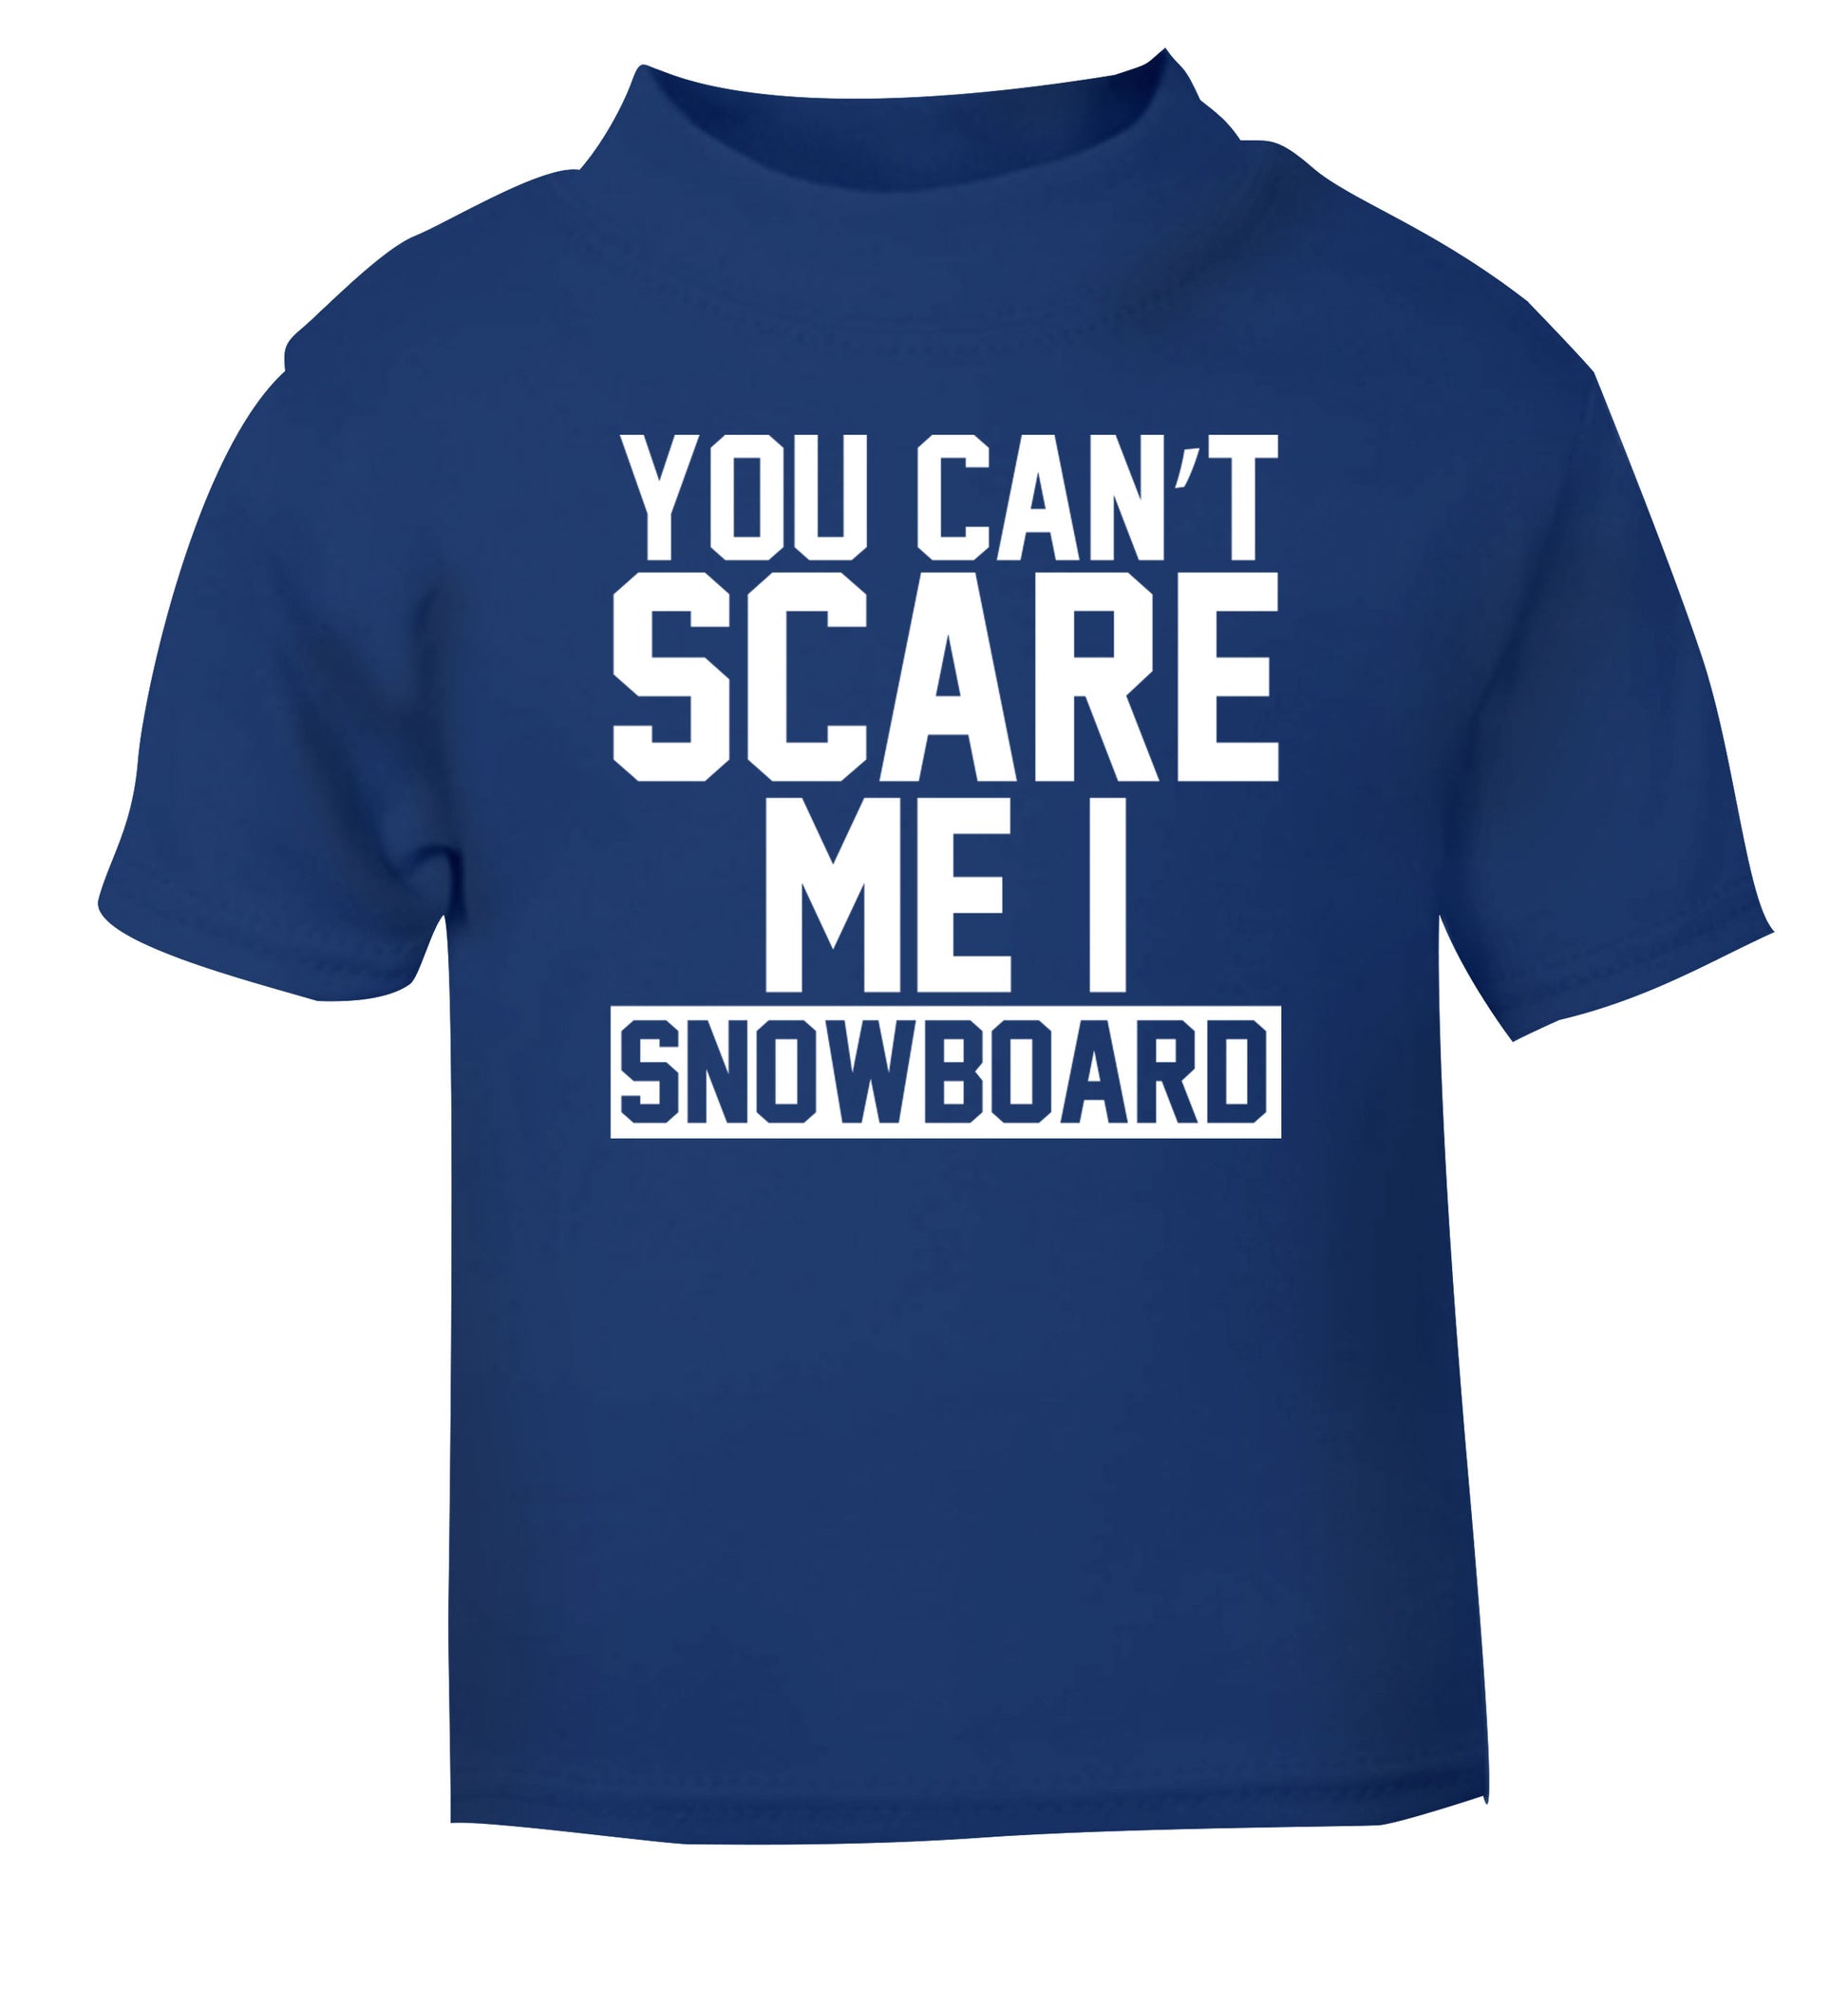 You can't scare me I snowboard blue Baby Toddler Tshirt 2 Years